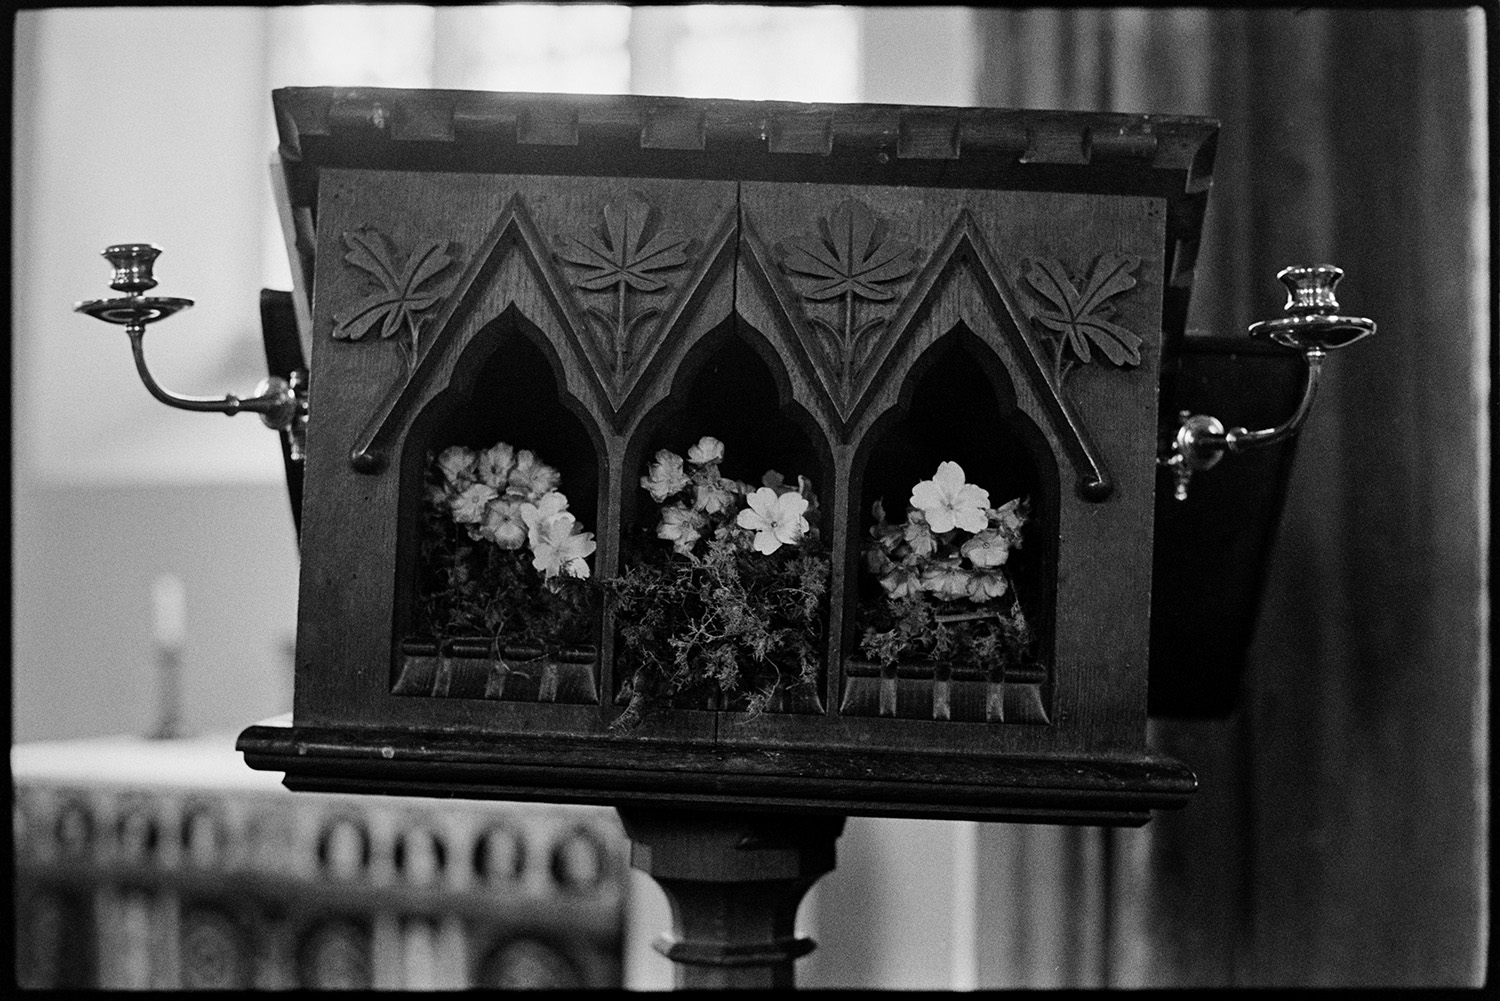 Easter flowers on lectern and with hymn books. 
[The lectern in Dowland Church decorated with flowers for Easter. It also has a carved leaf decoration and two candlesticks attached.]